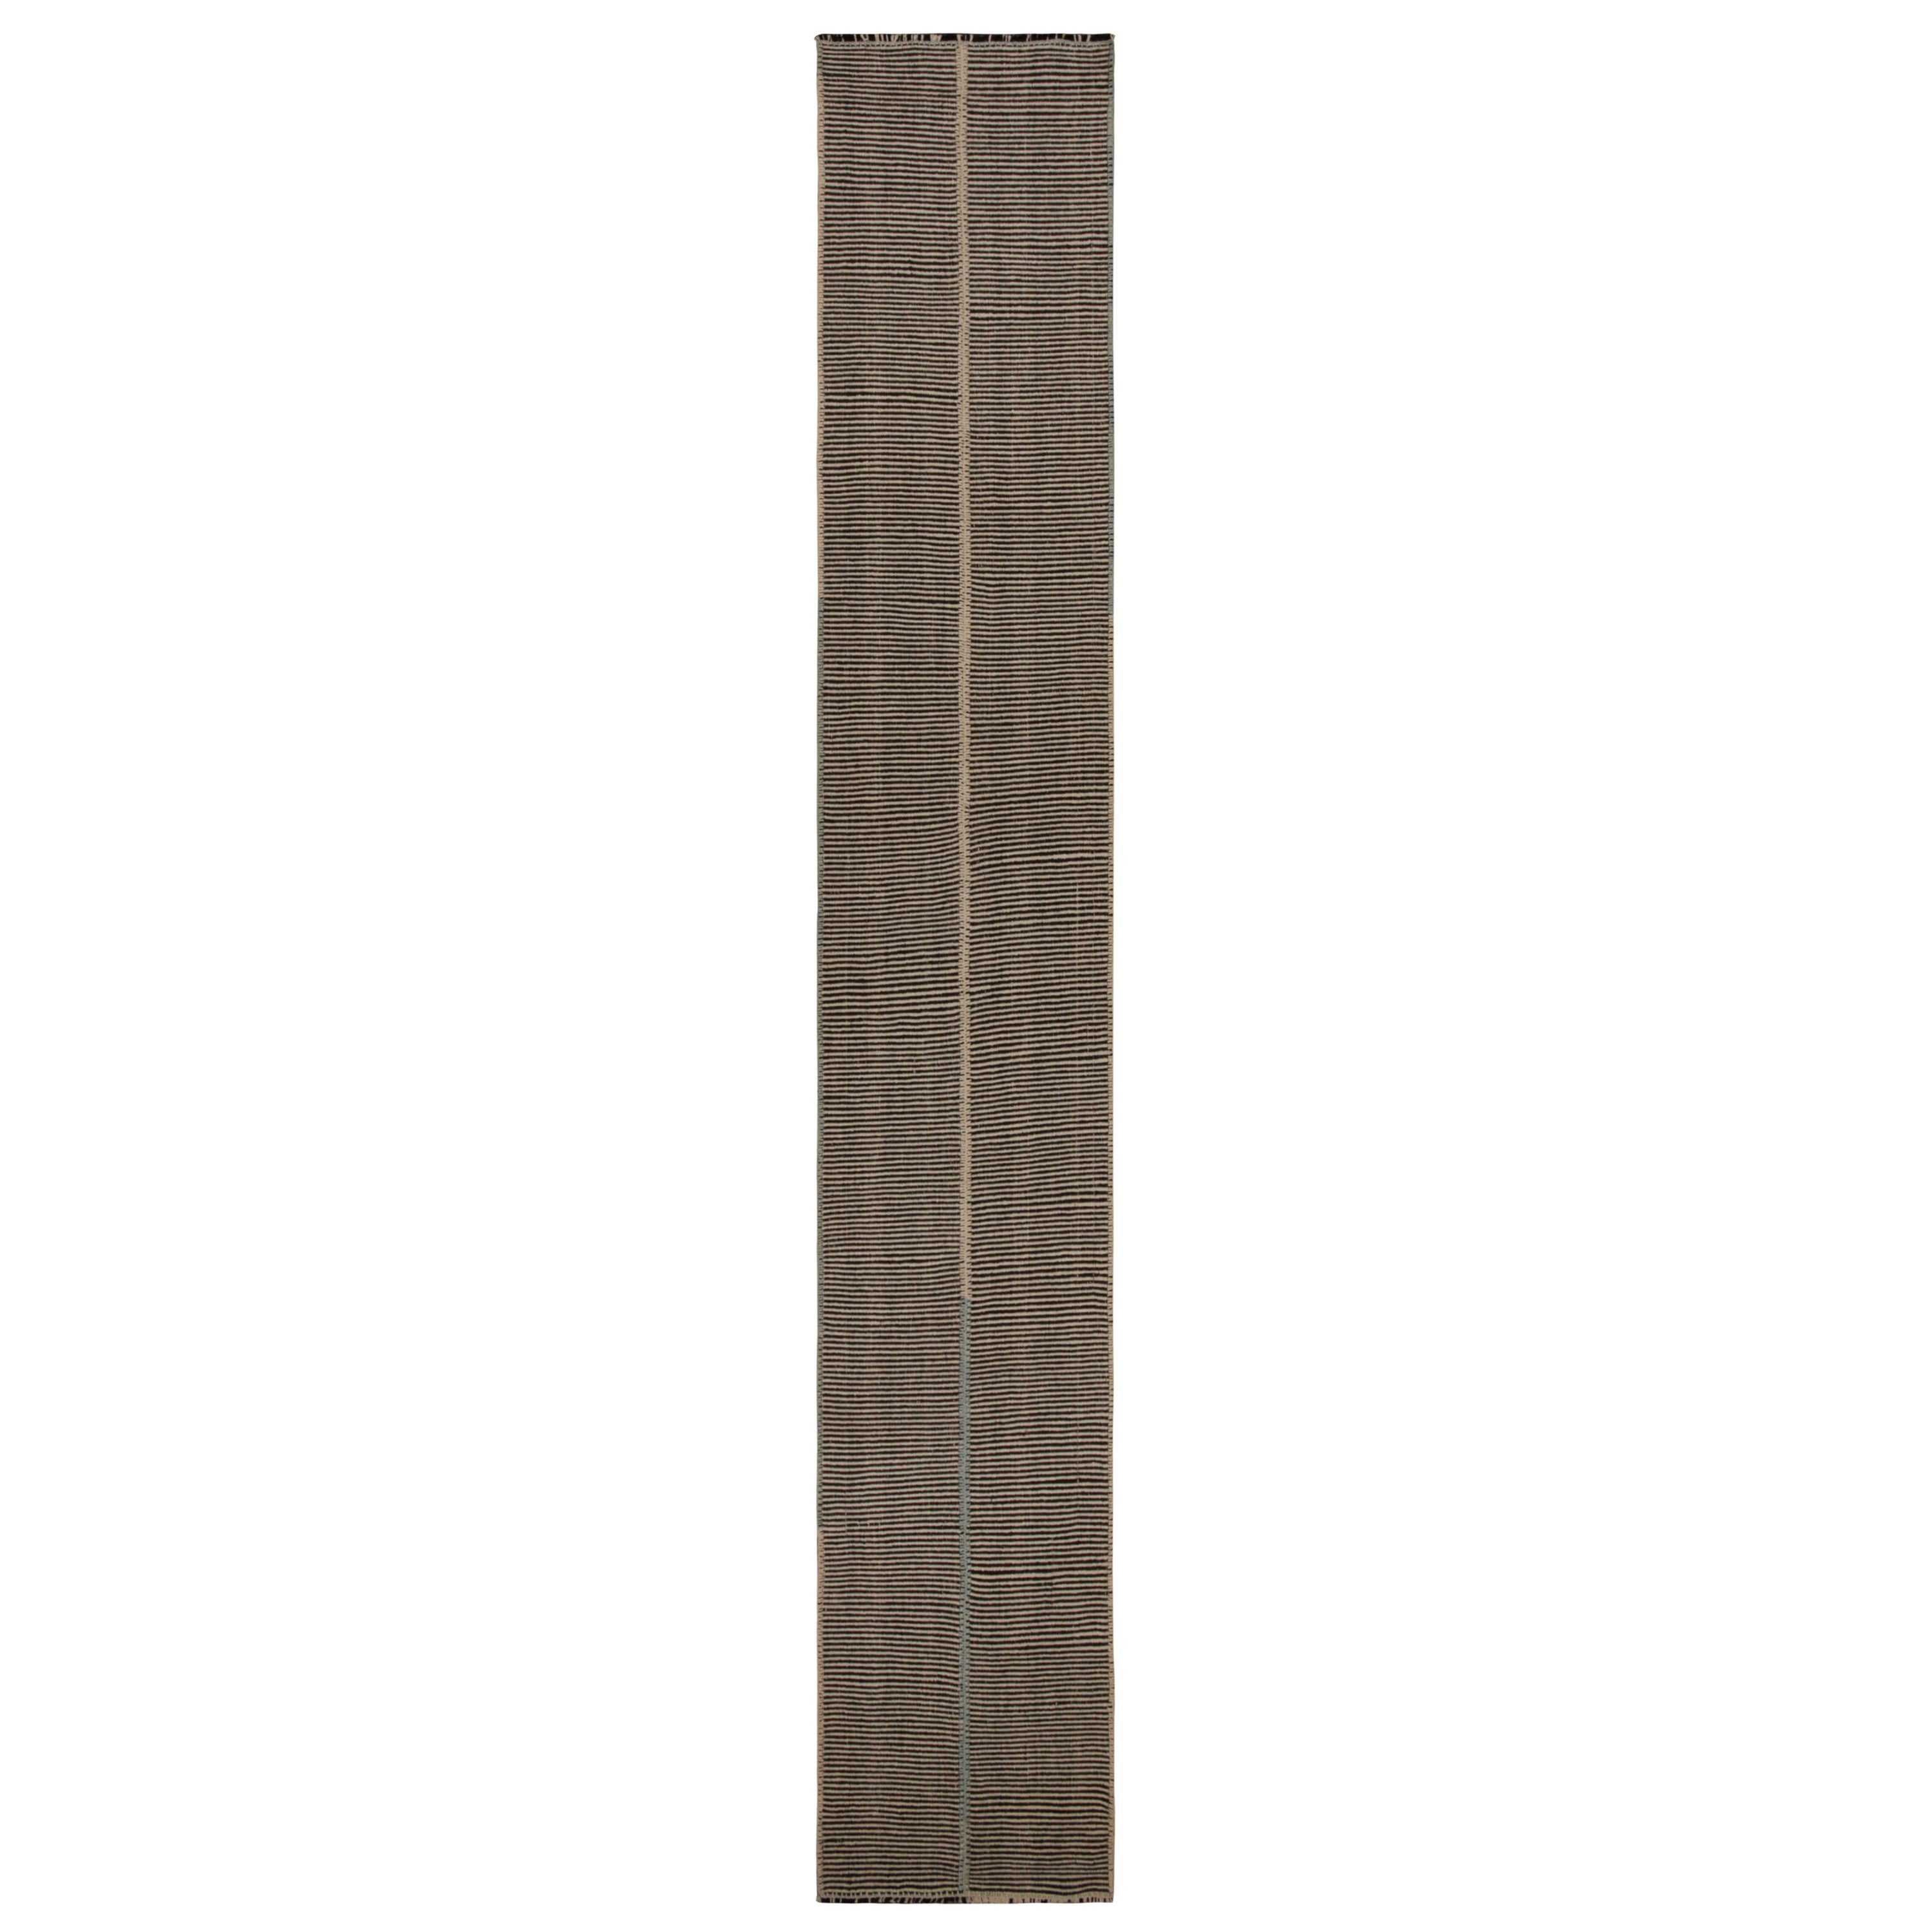 Rug & Kilim’s Contemporary Kilim Extra-Long Runner Rug, in Beige and Black For Sale